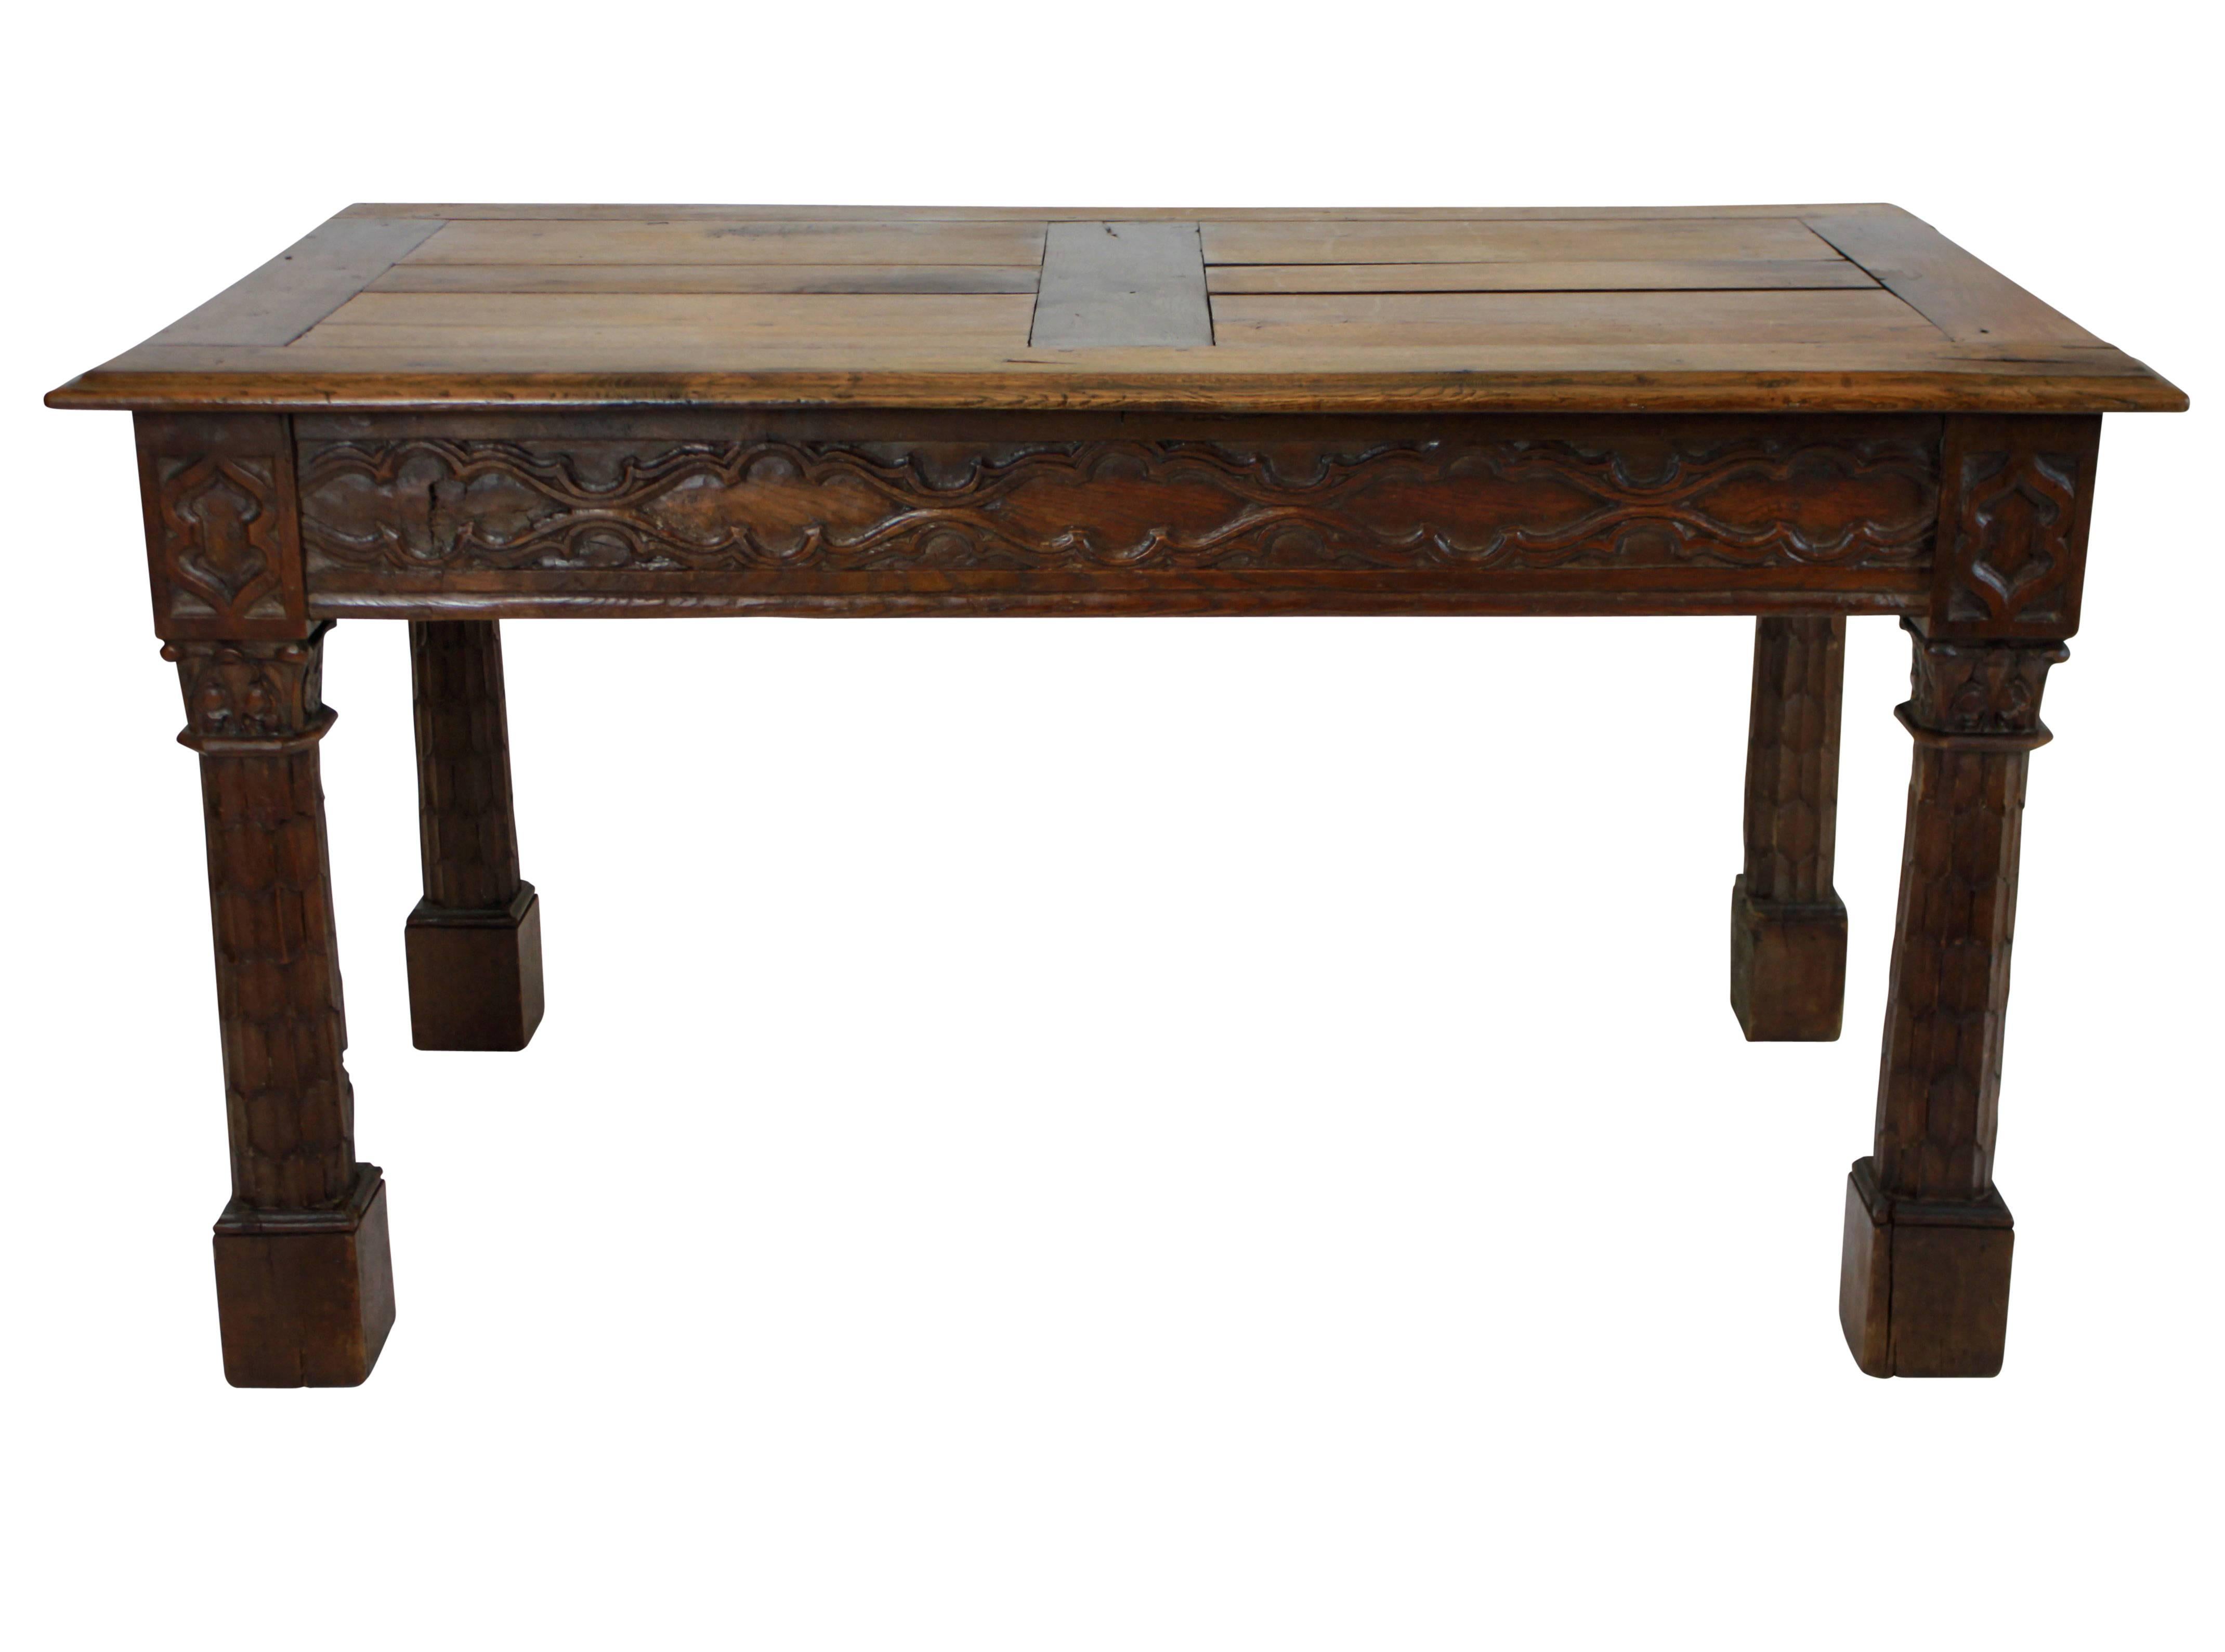 A French Gothic Revival oak center table of good quality with tracery friezes on all four sides and palm tree inspired legs.
 